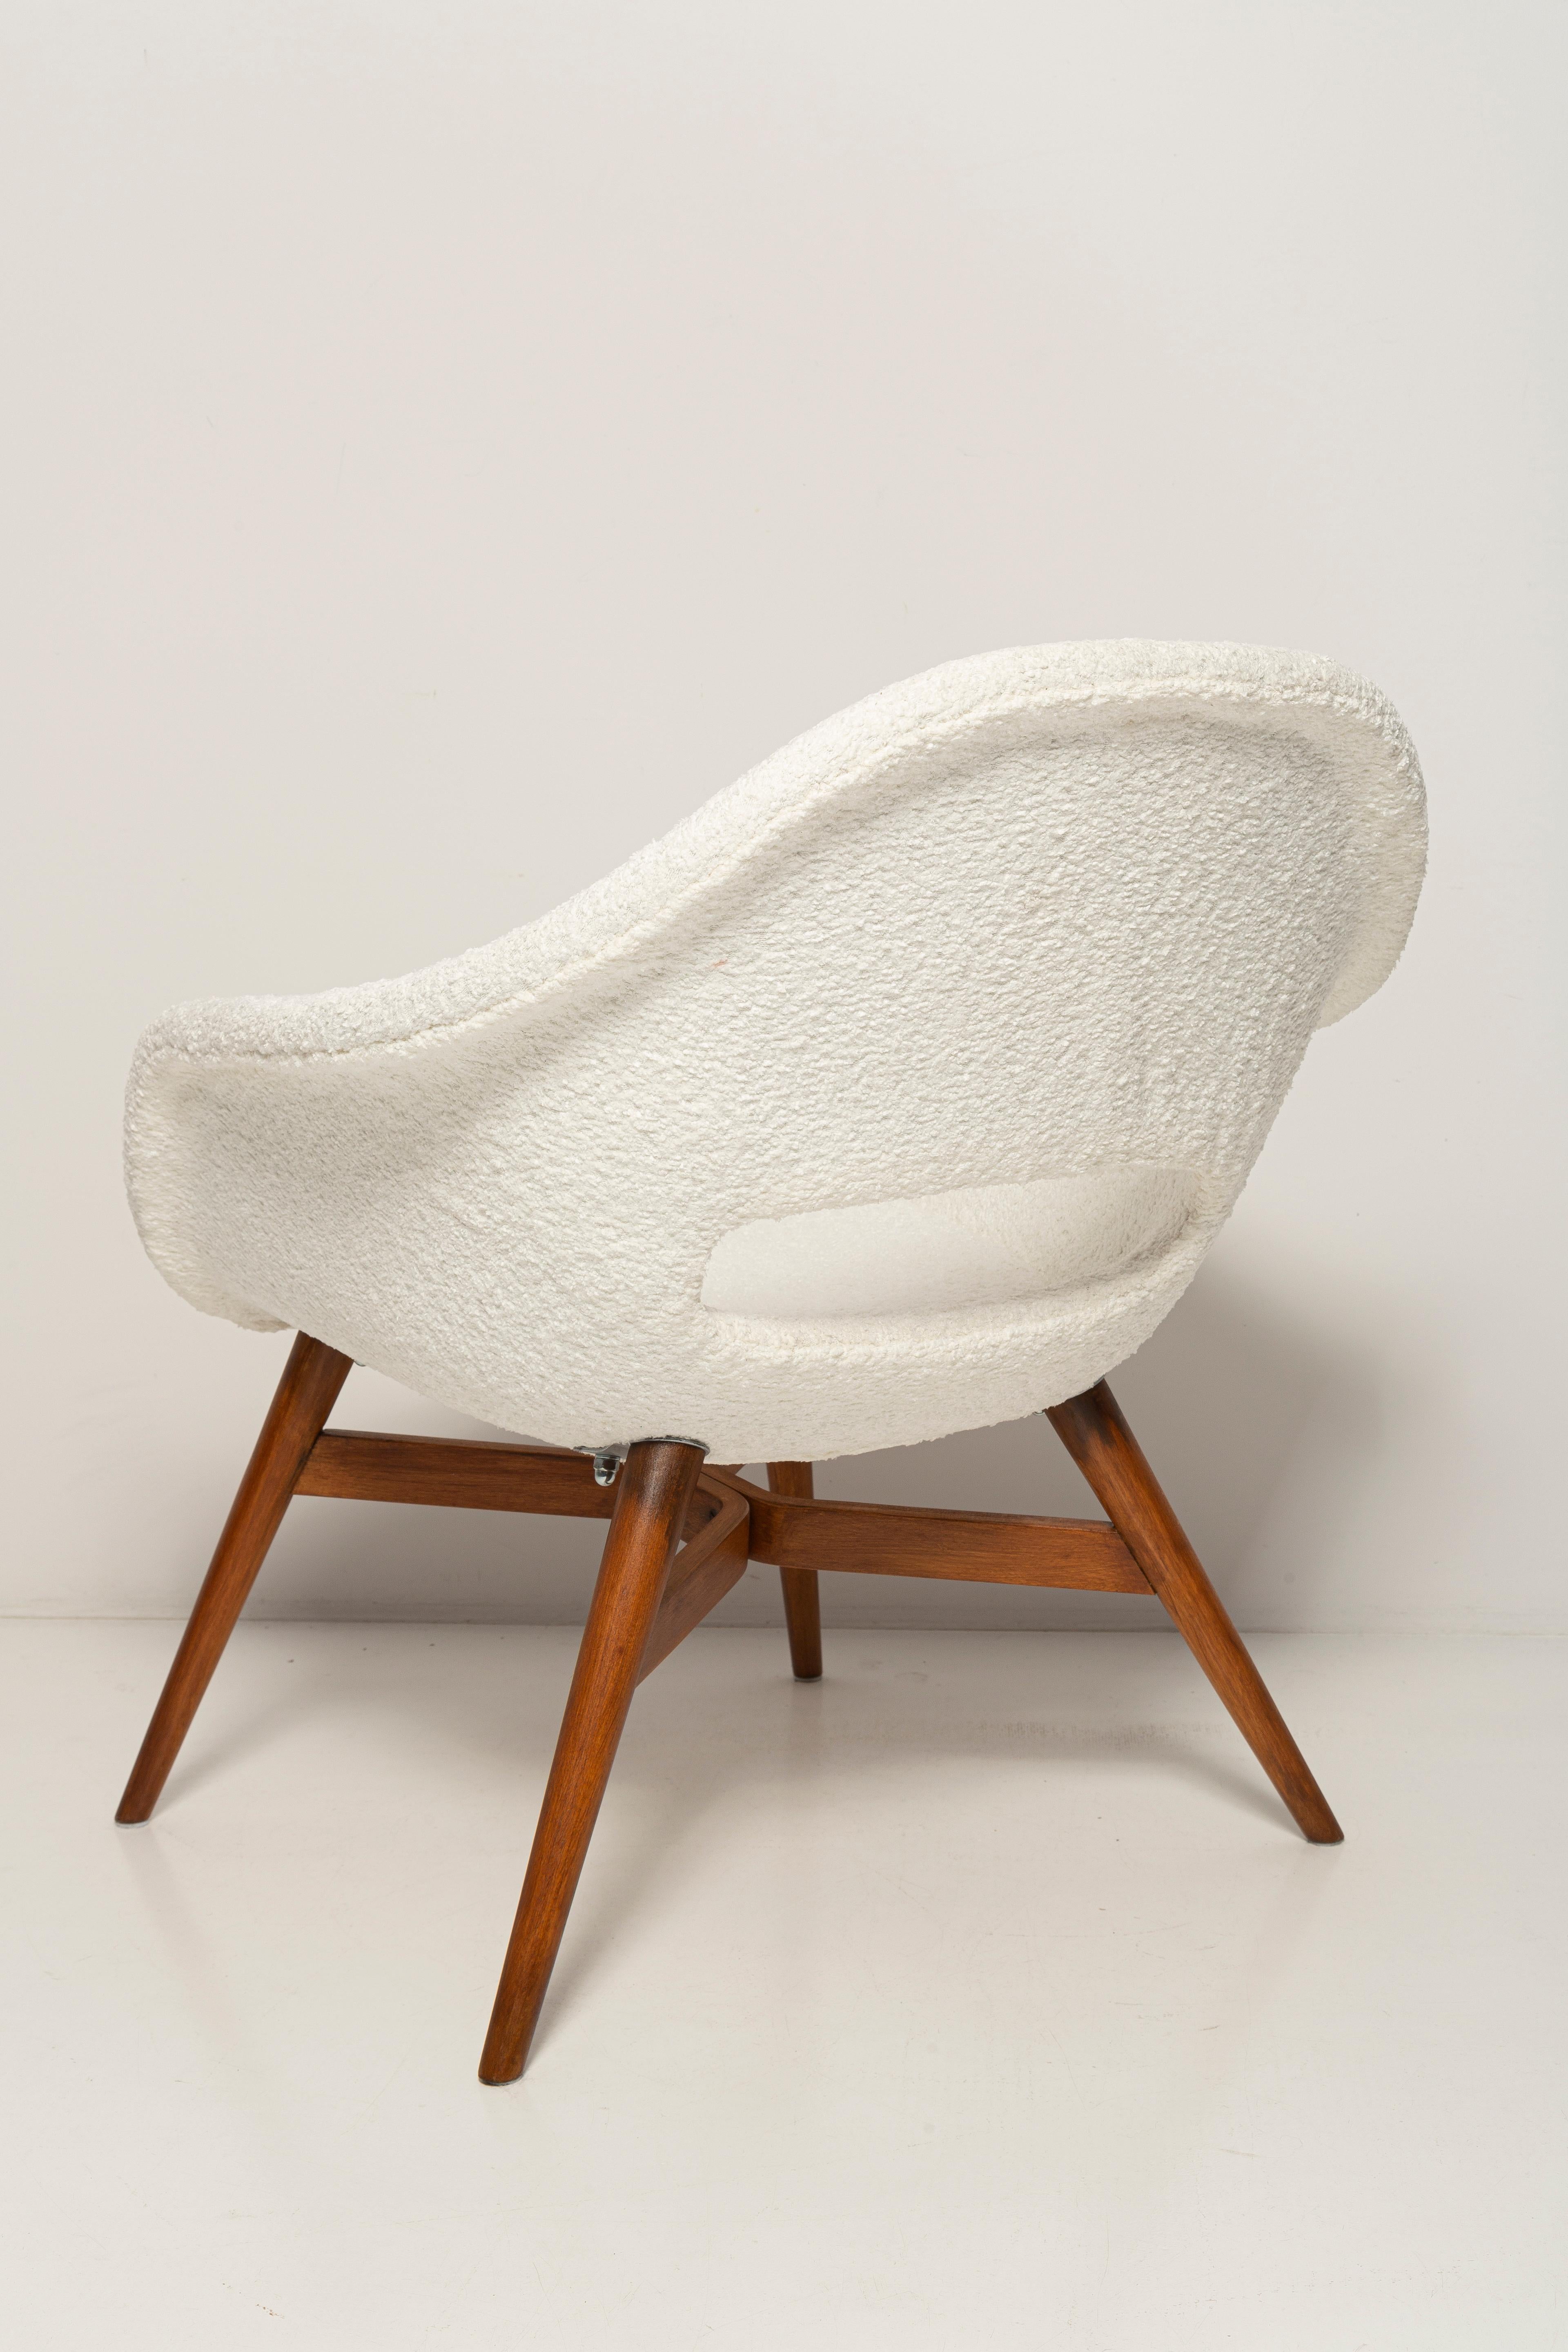 Set of 2 Mid Century White Boucle Shell Chairs, M Navratil, Czechoslovakia, 1960 For Sale 3